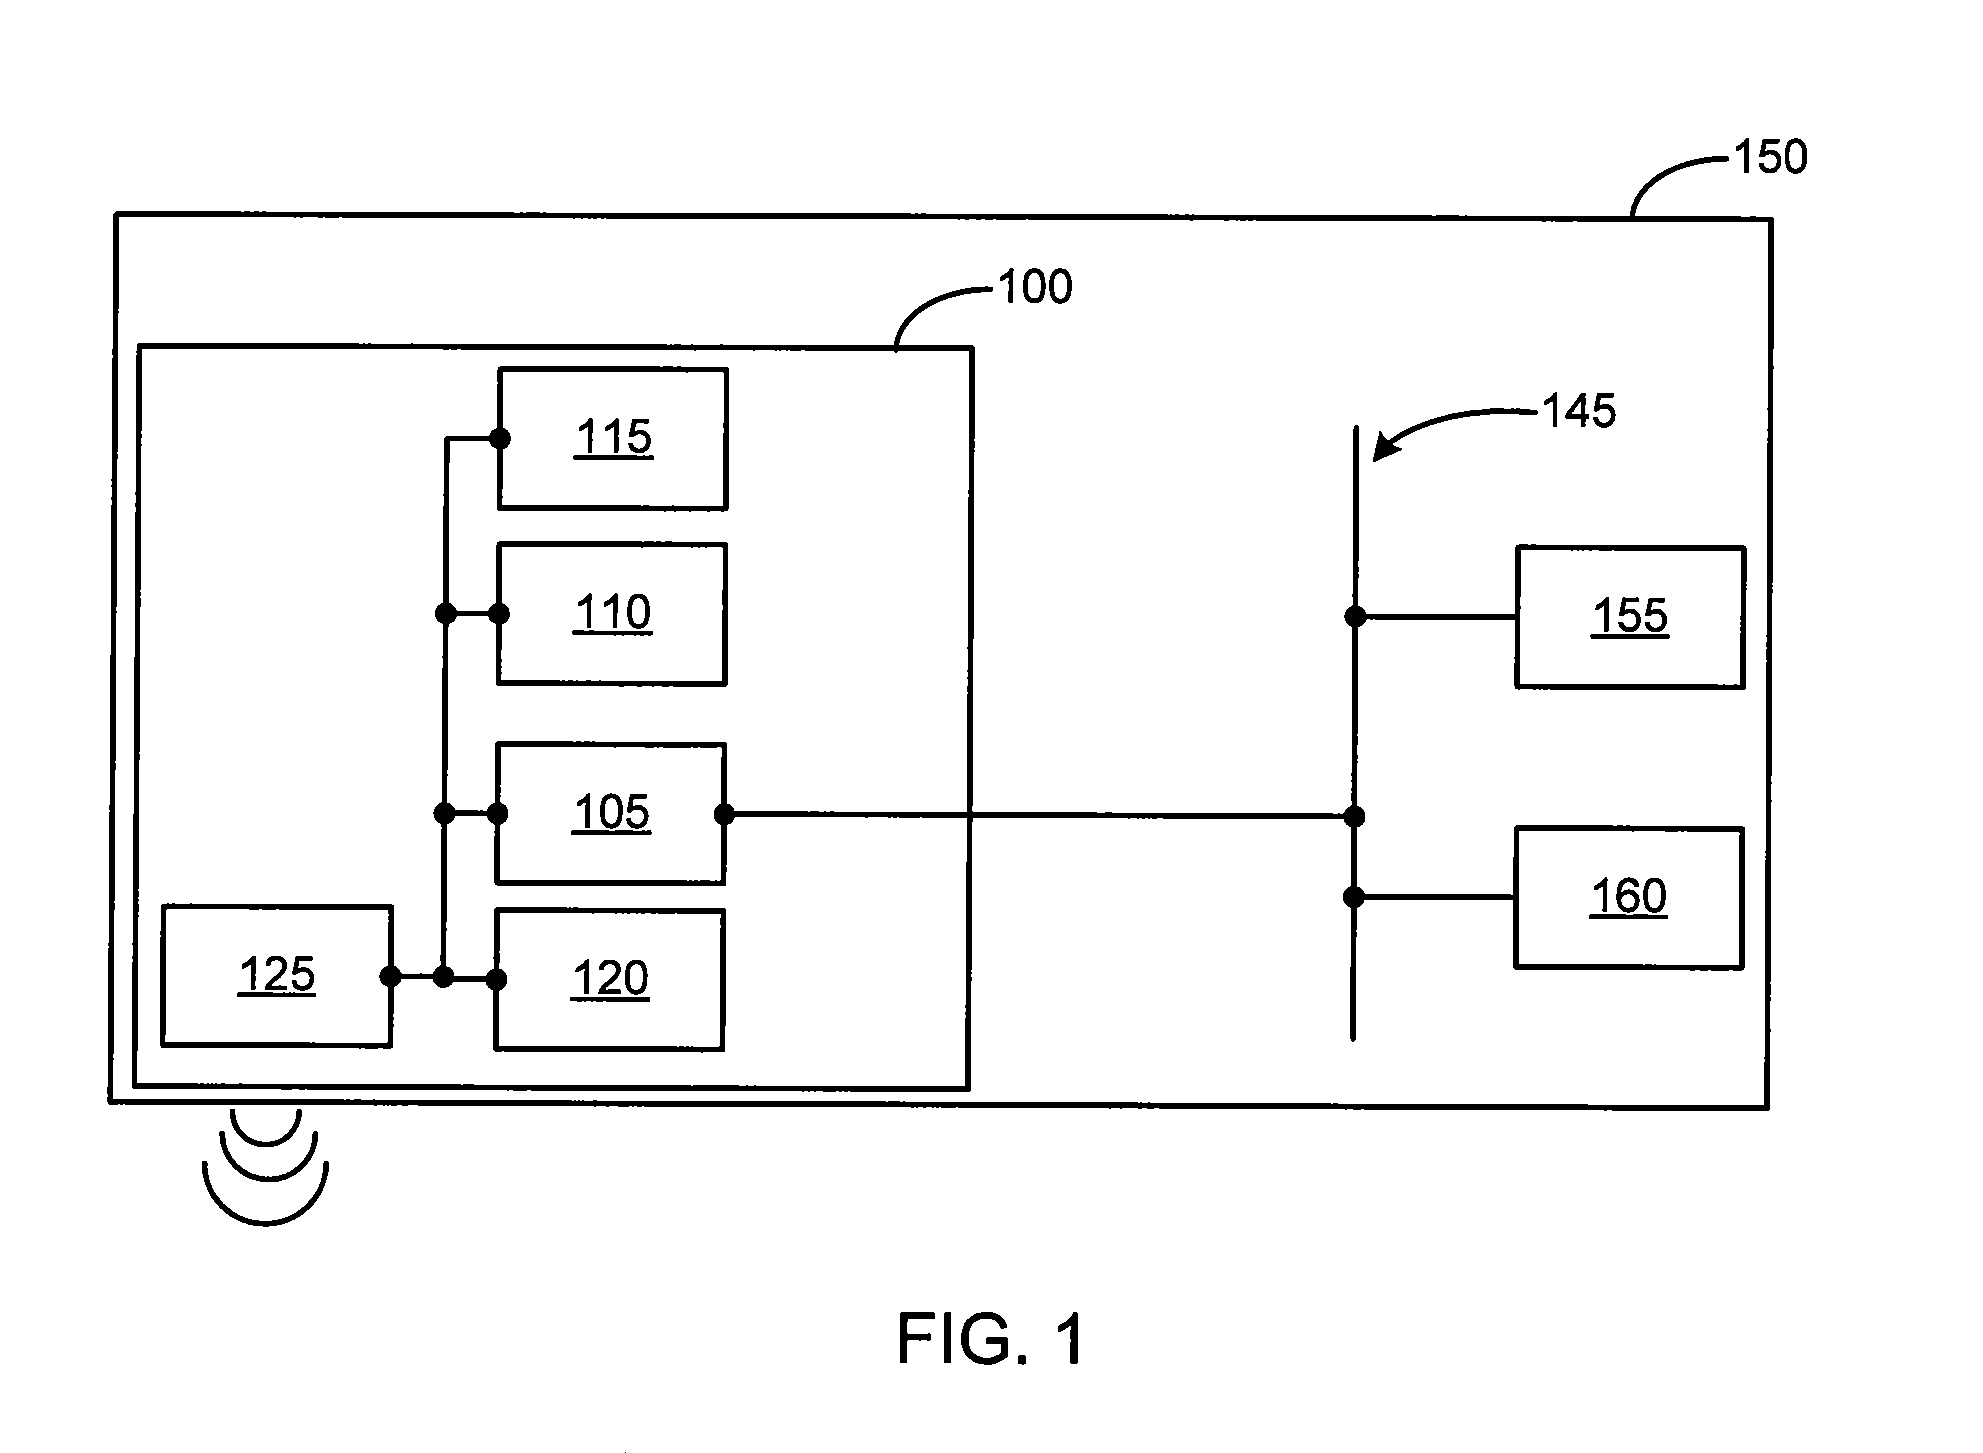 Navigation system activation of a vehicular directional signal